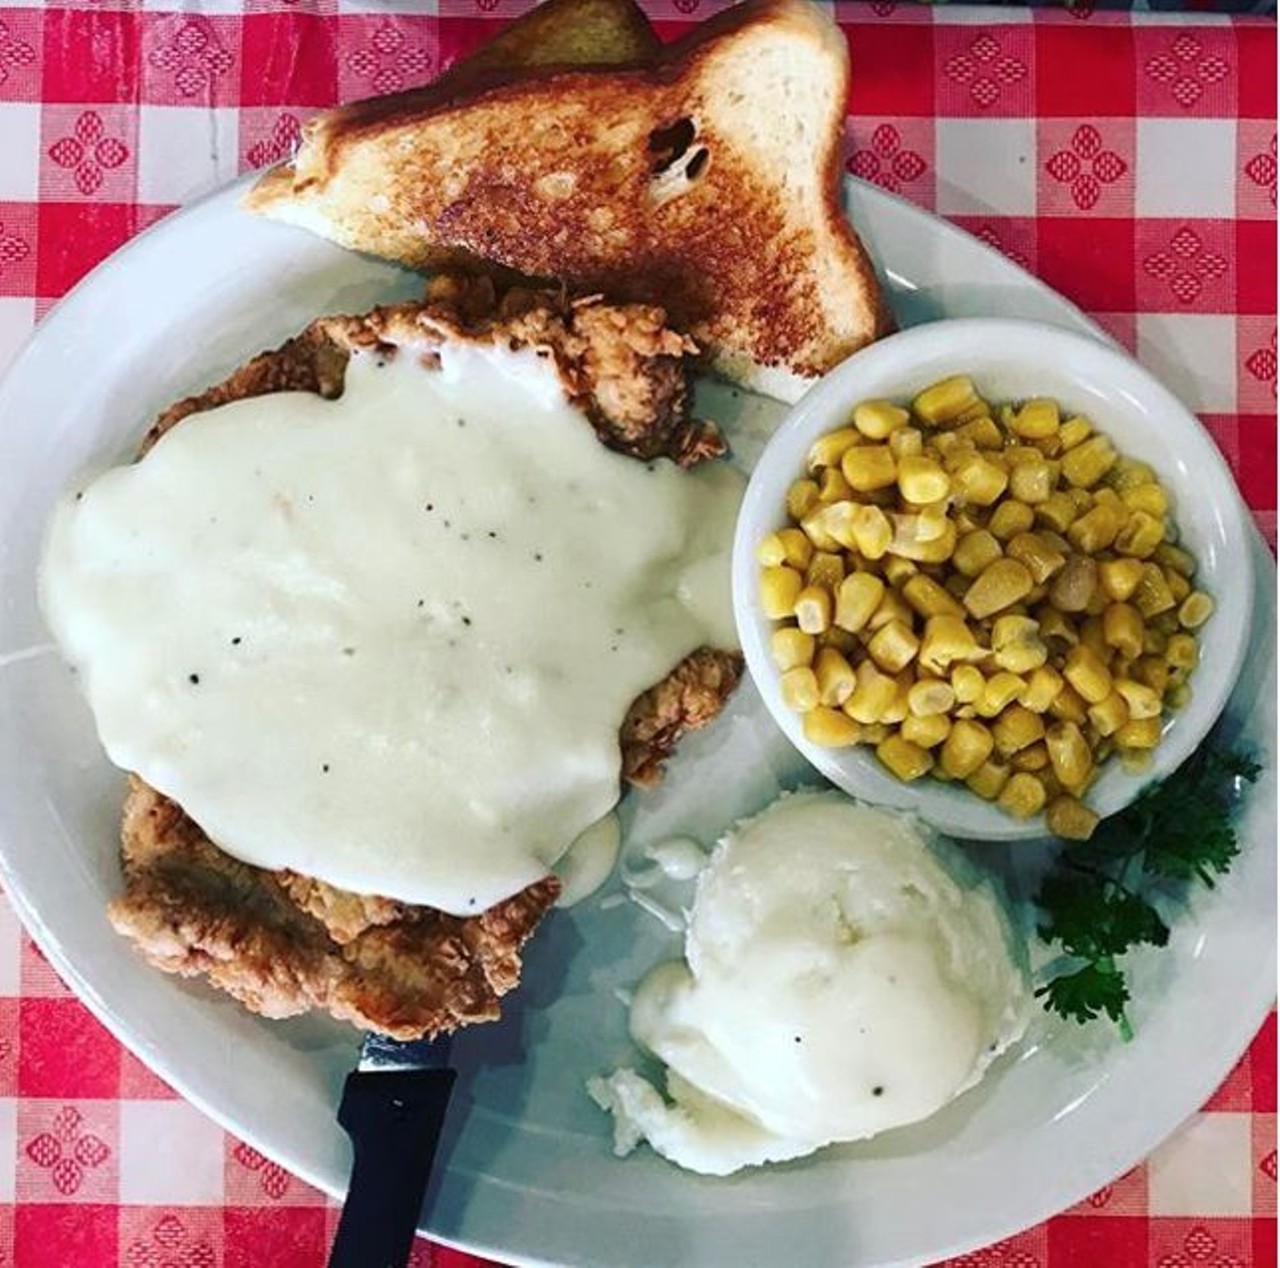 Abel&#146;s Diner
17327 N Interstate Hwy. 35 Suite 200, Schertz, (210) 651-9606
When you're in need of some comfort food and at a place that feels like home, Abel's Diner has got your back.
Photo via Instagram,  i_eat_texas